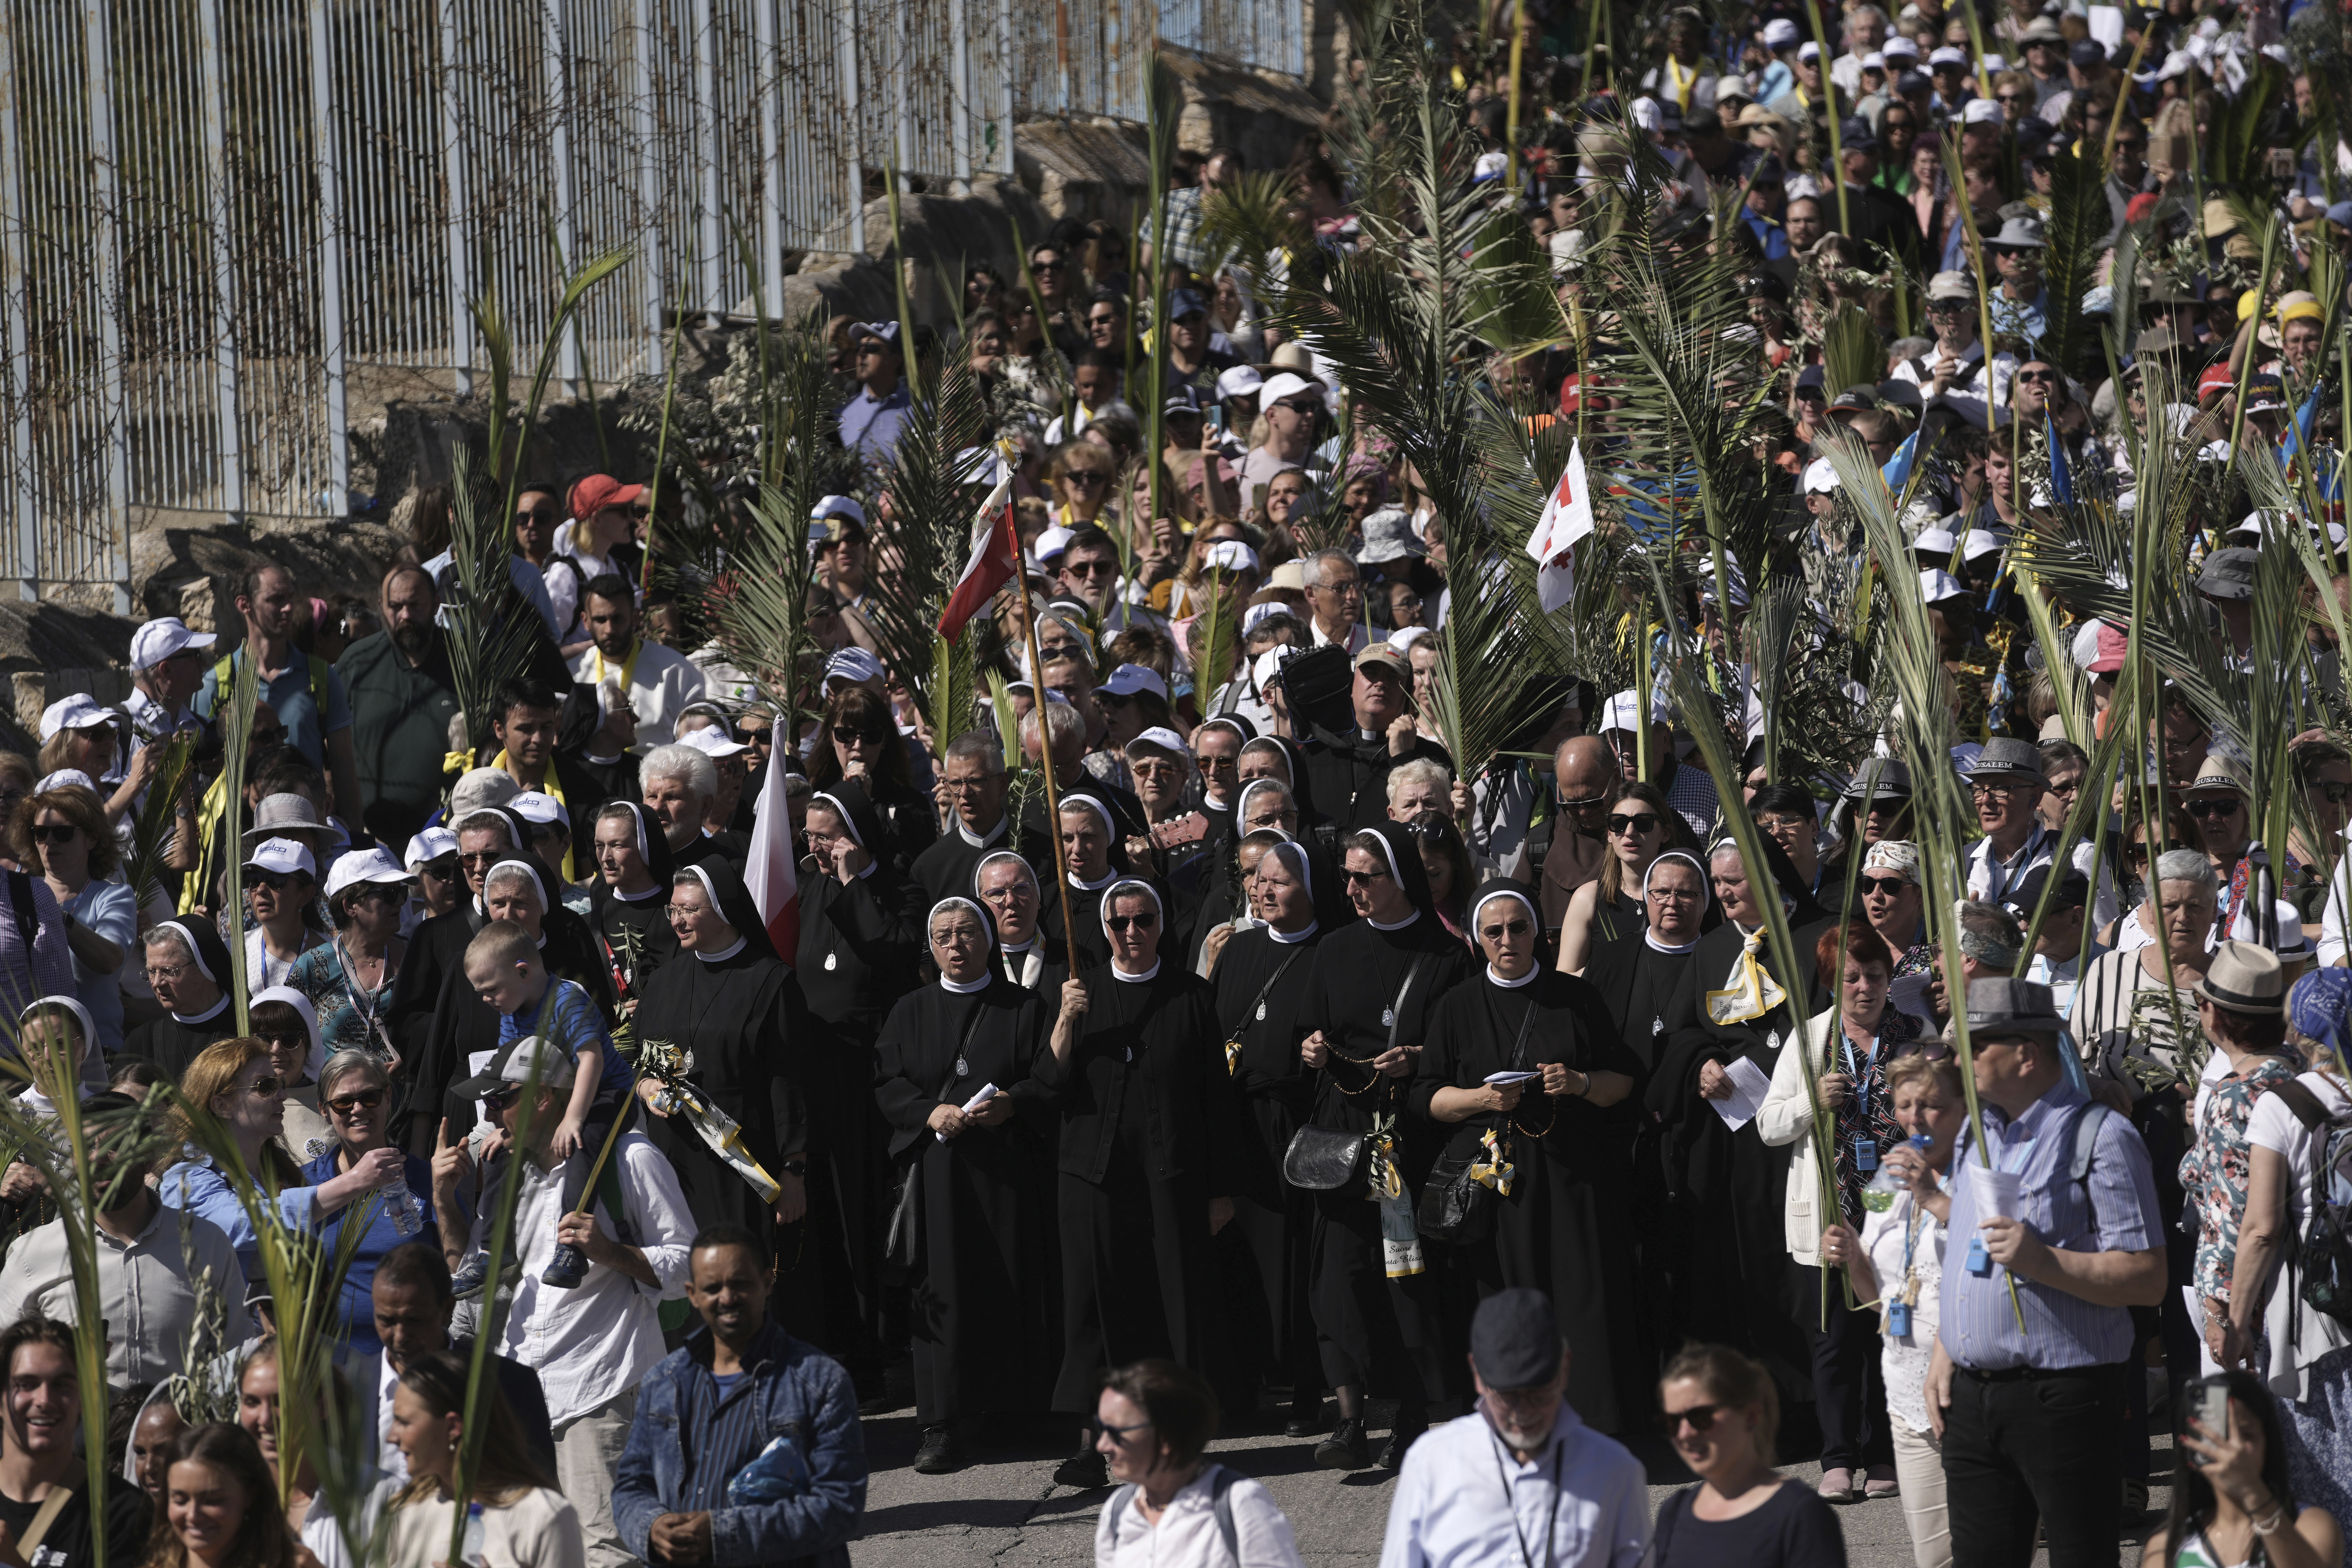 Christians walk in the Palm Sunday procession on the Mount of Olives